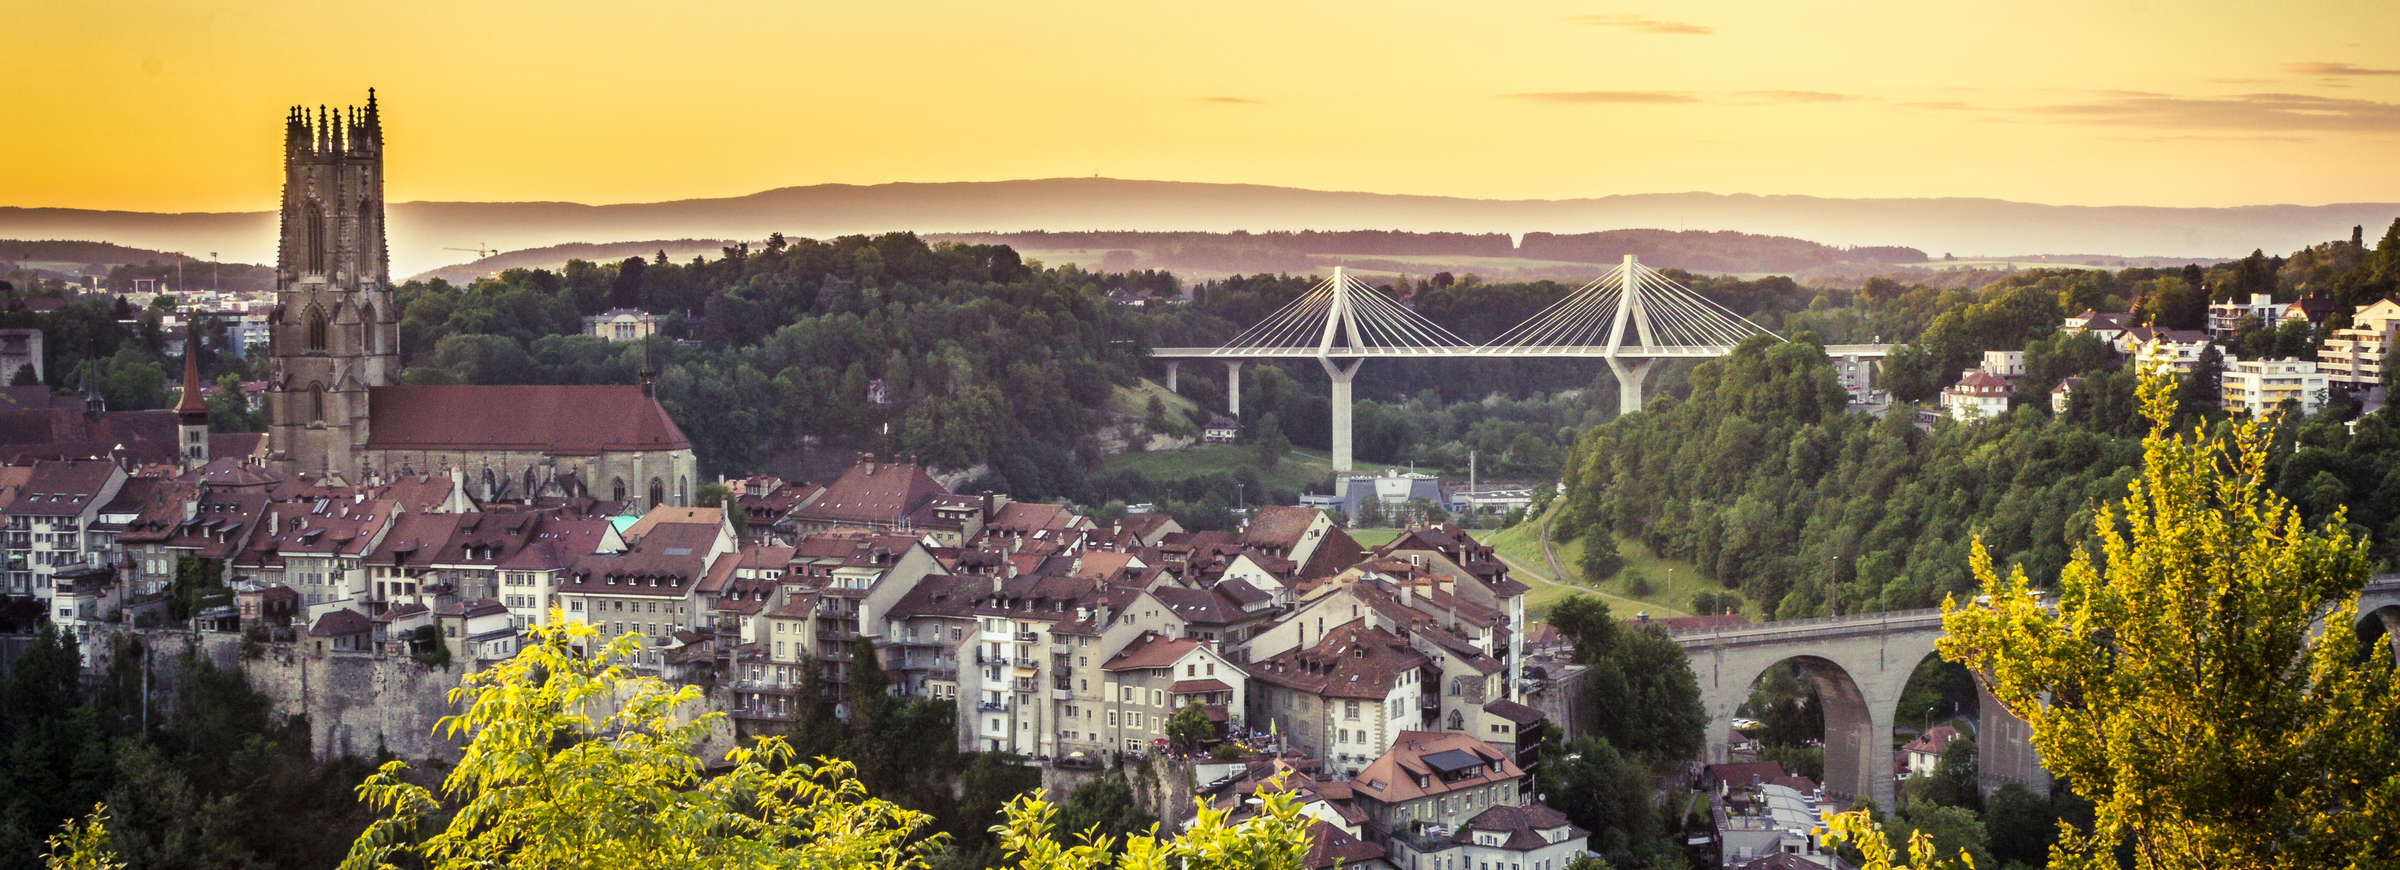 Fribourg ville © Pierre Cuony